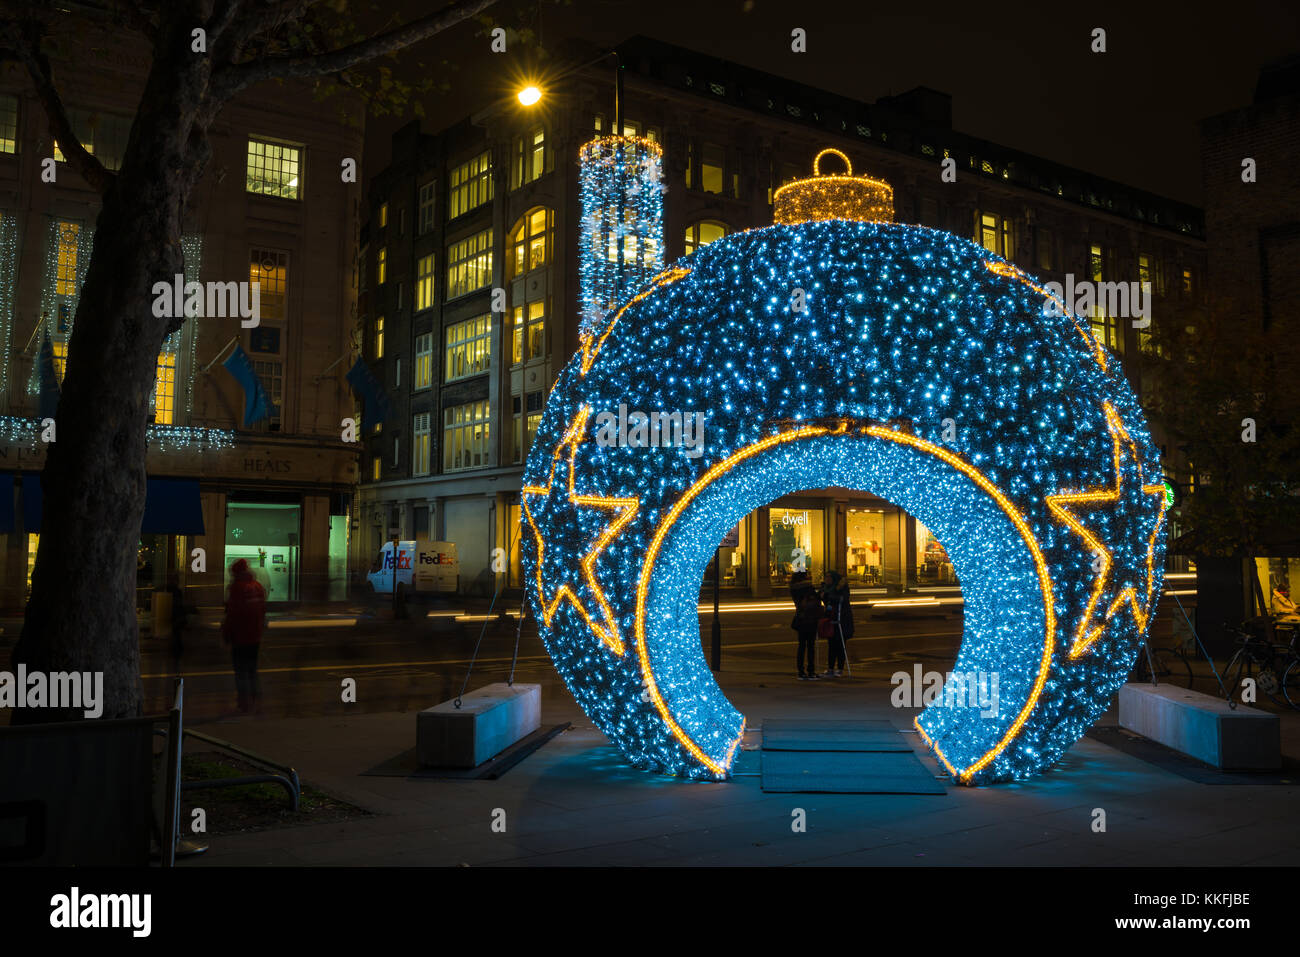 LONDON, UK - NOVEMBER 30, 2017: A gigantic blue bauble decorates Whitfield Gardens, Goodge Street and attracts  Londoners and tourists during the fest Stock Photo